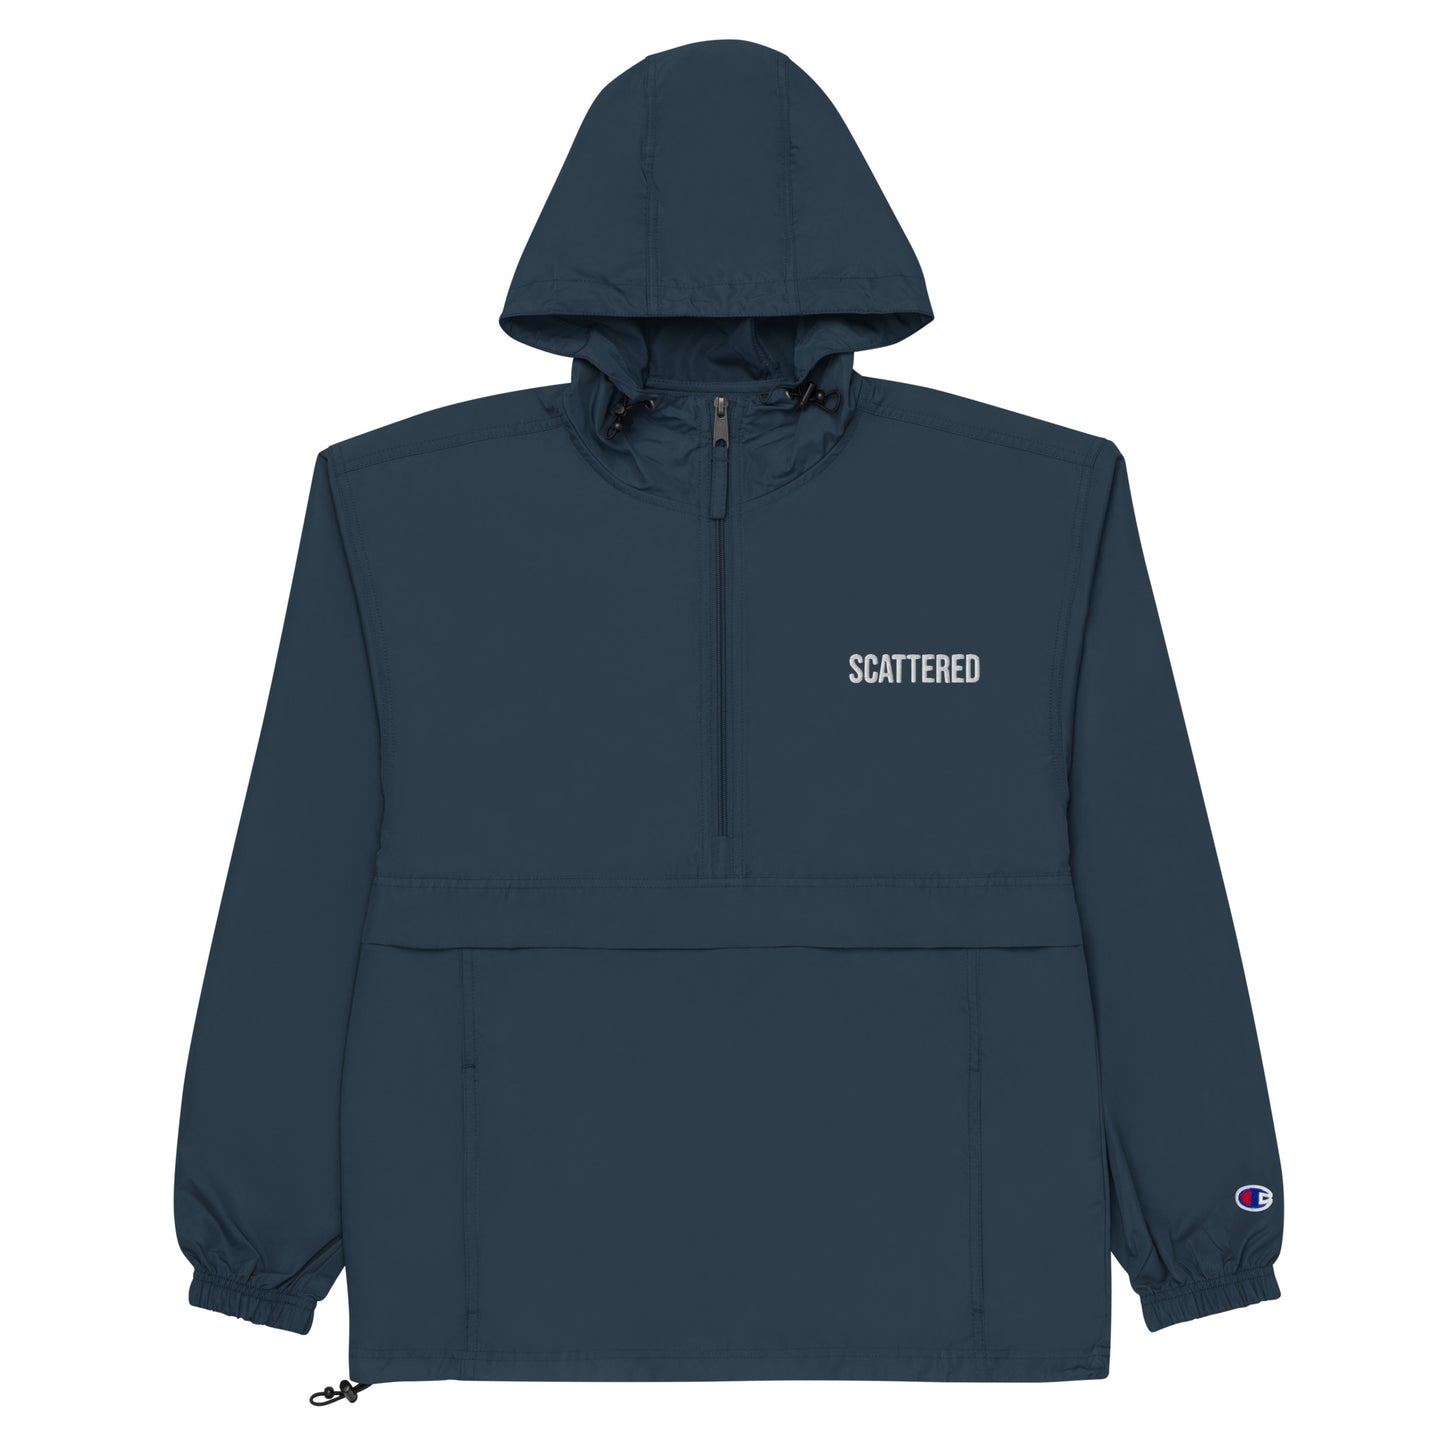 Scattered Logo Embroidered Champion Jacket